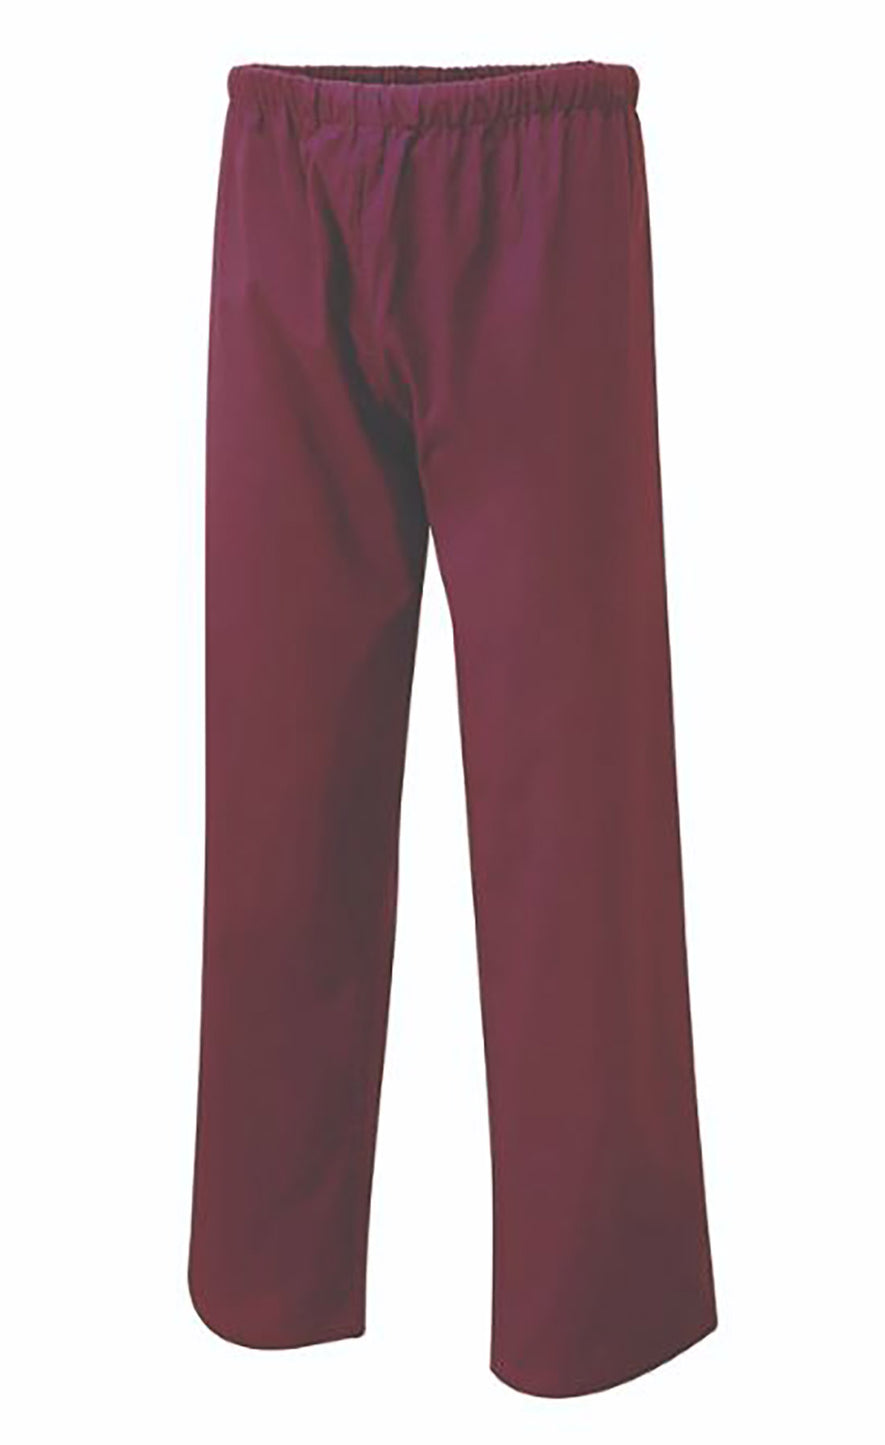 Uneek Clothing Scrub Trousers in maroon with elasticated waist.